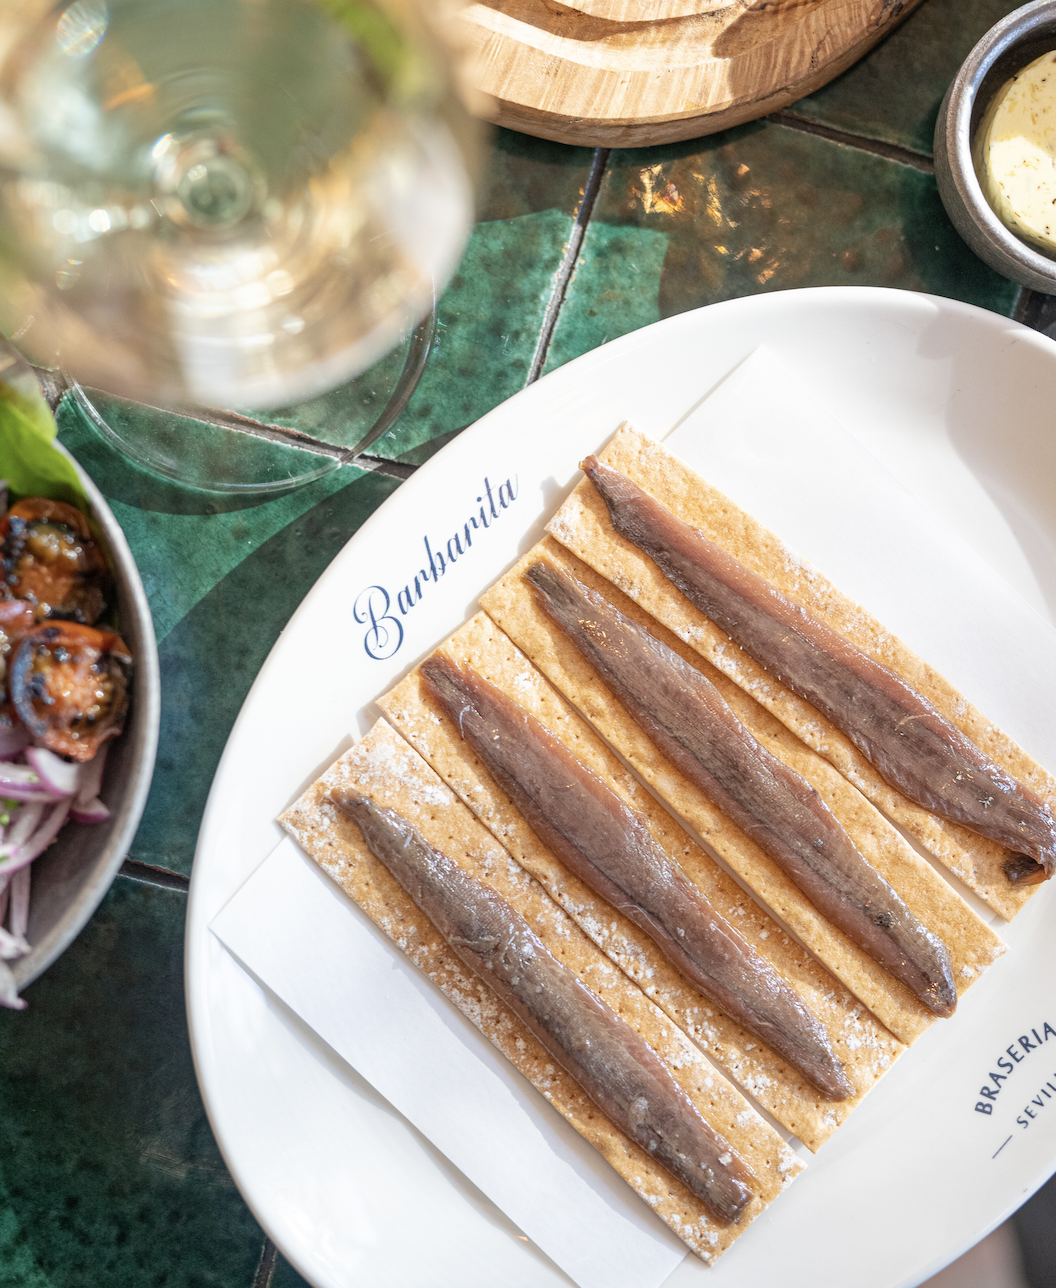 Anchovies from Santoña 00 "Quarentena" with tarragon butter